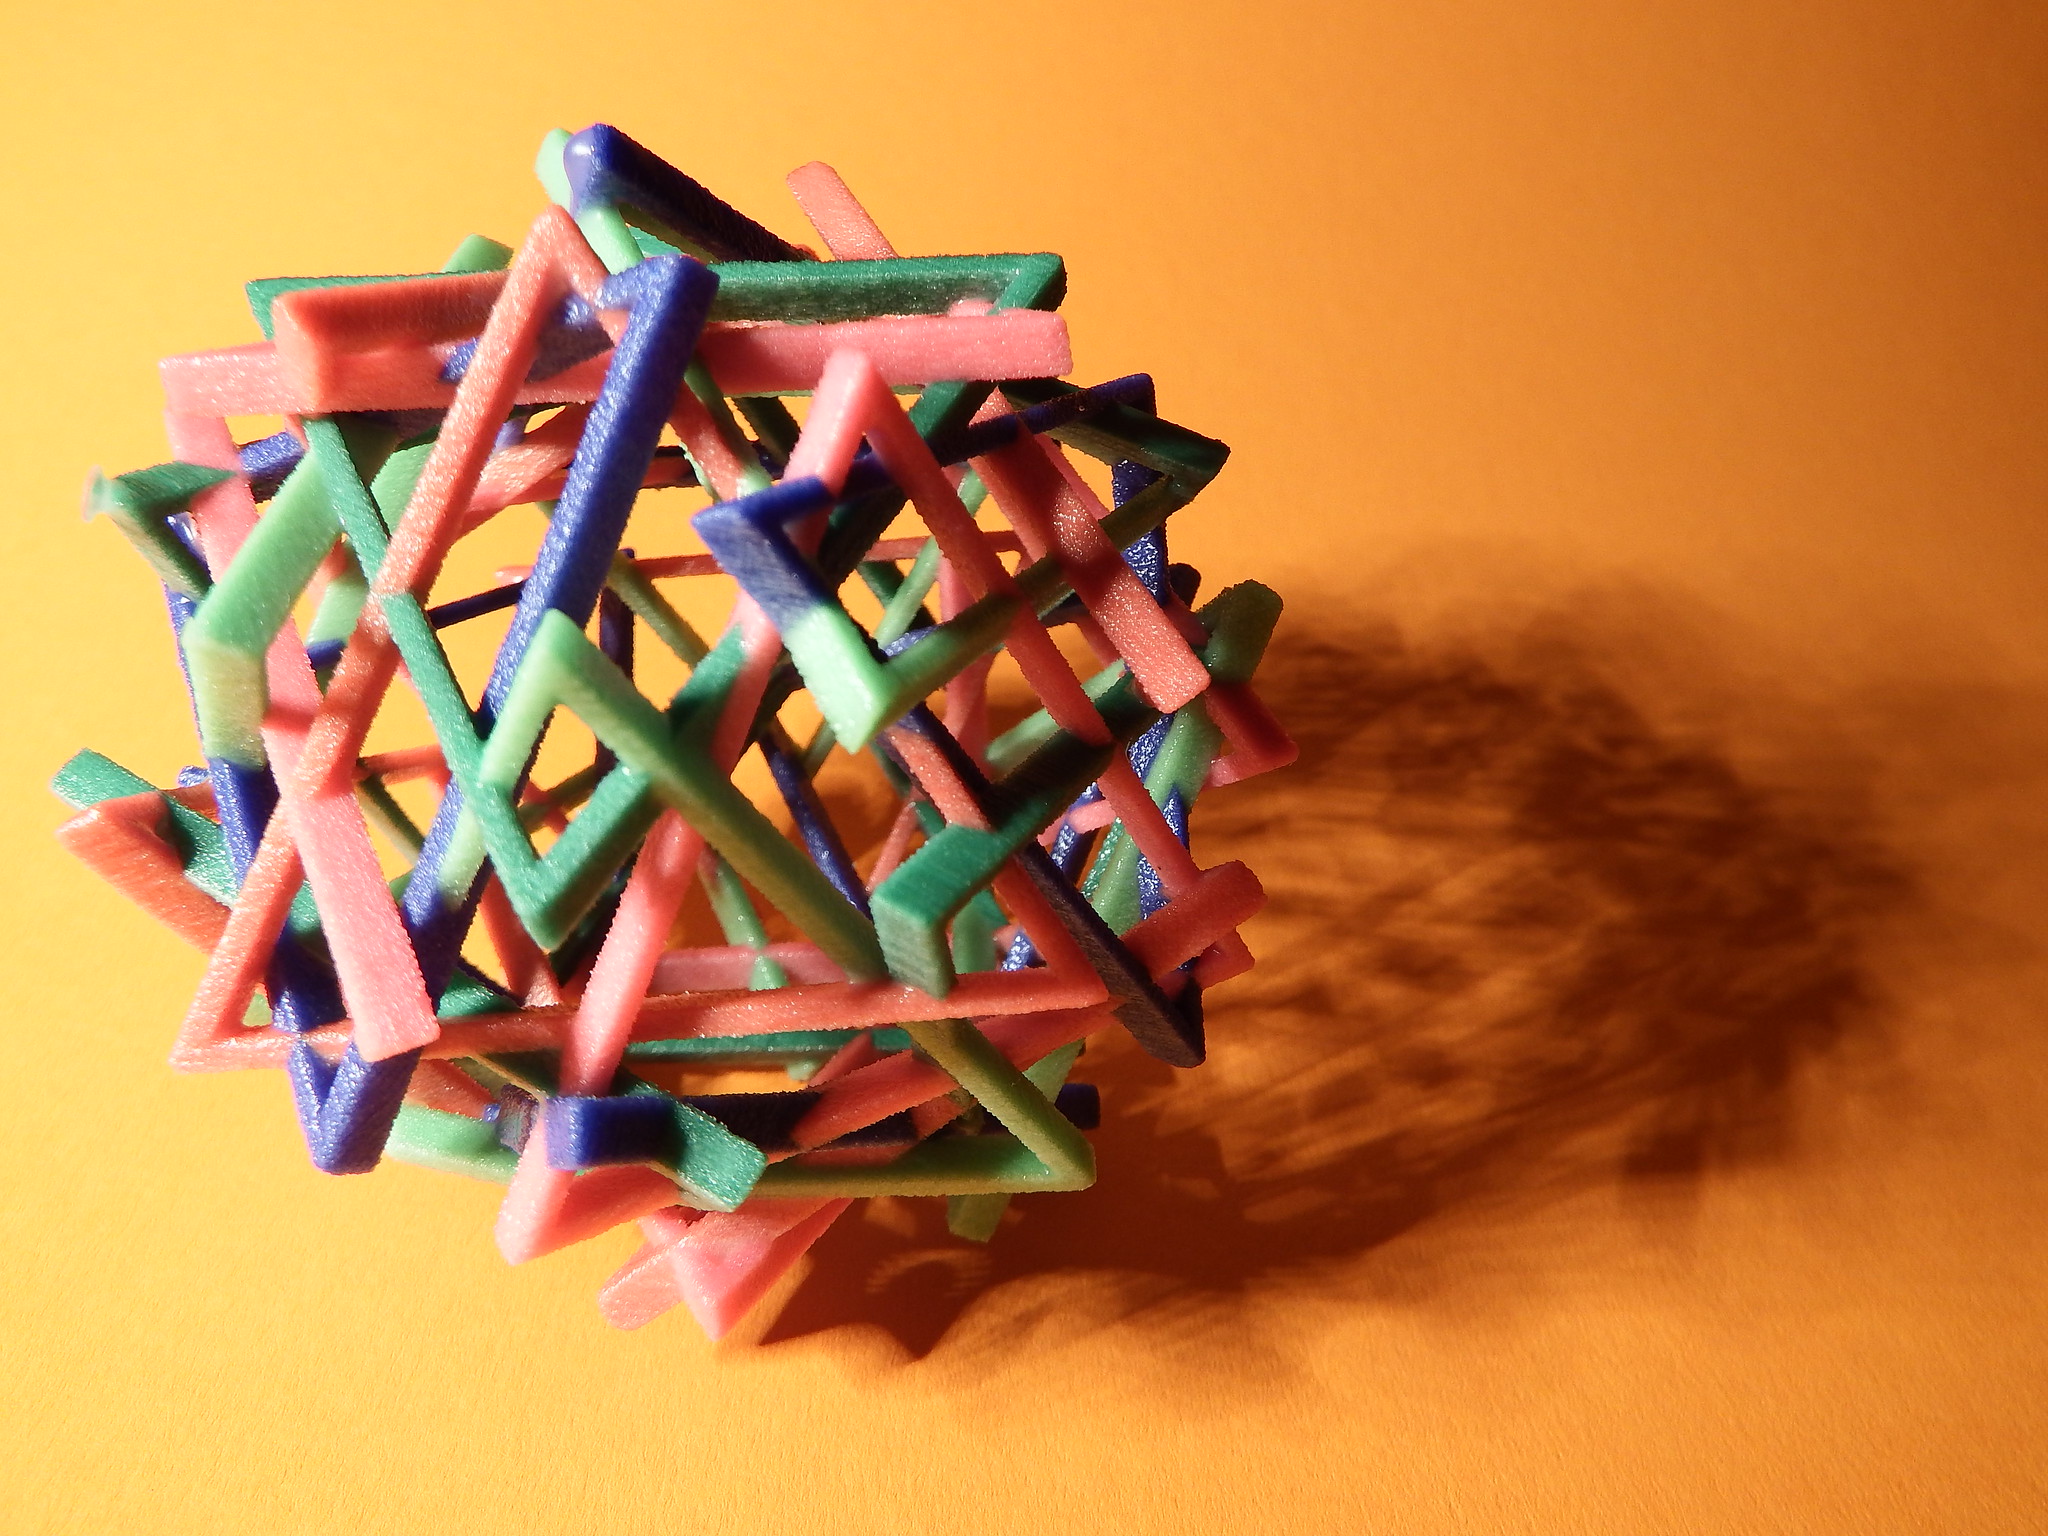 A spherical shaped component made of different individual 3D printed triangles of various colors and materials